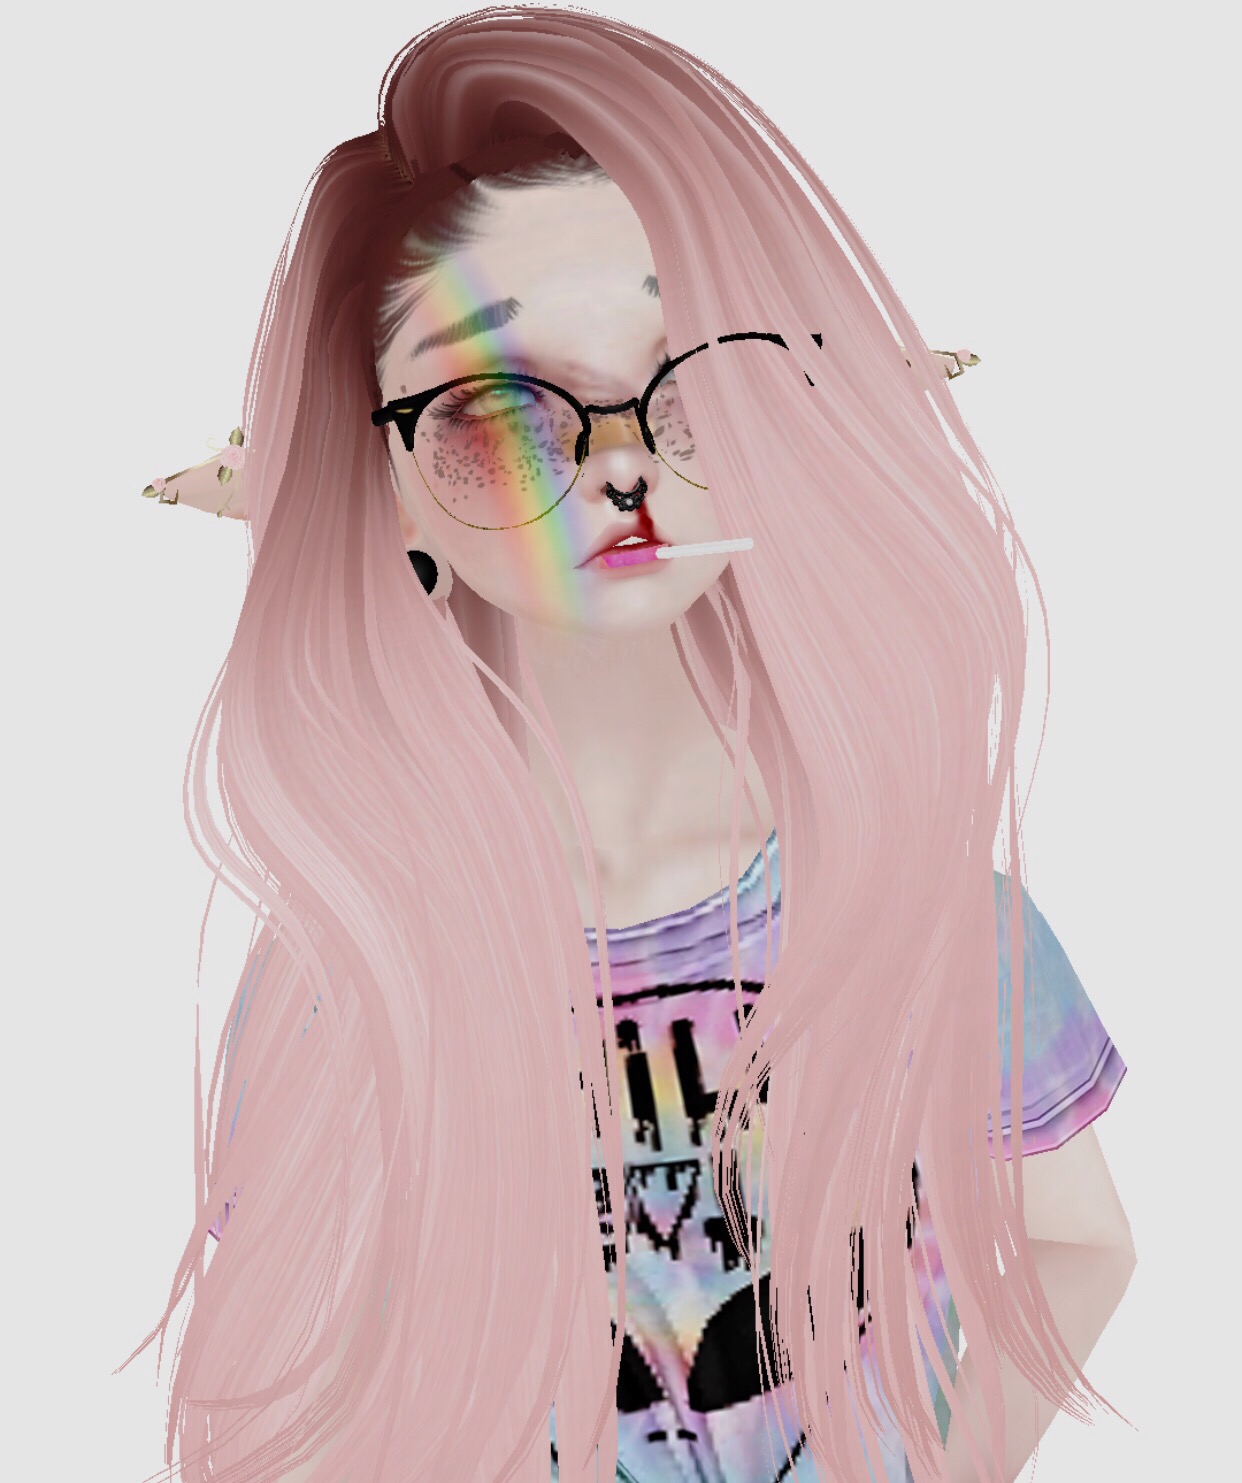 Aesthetic Girl With Glasses Drawing - Largest Wallpaper Portal